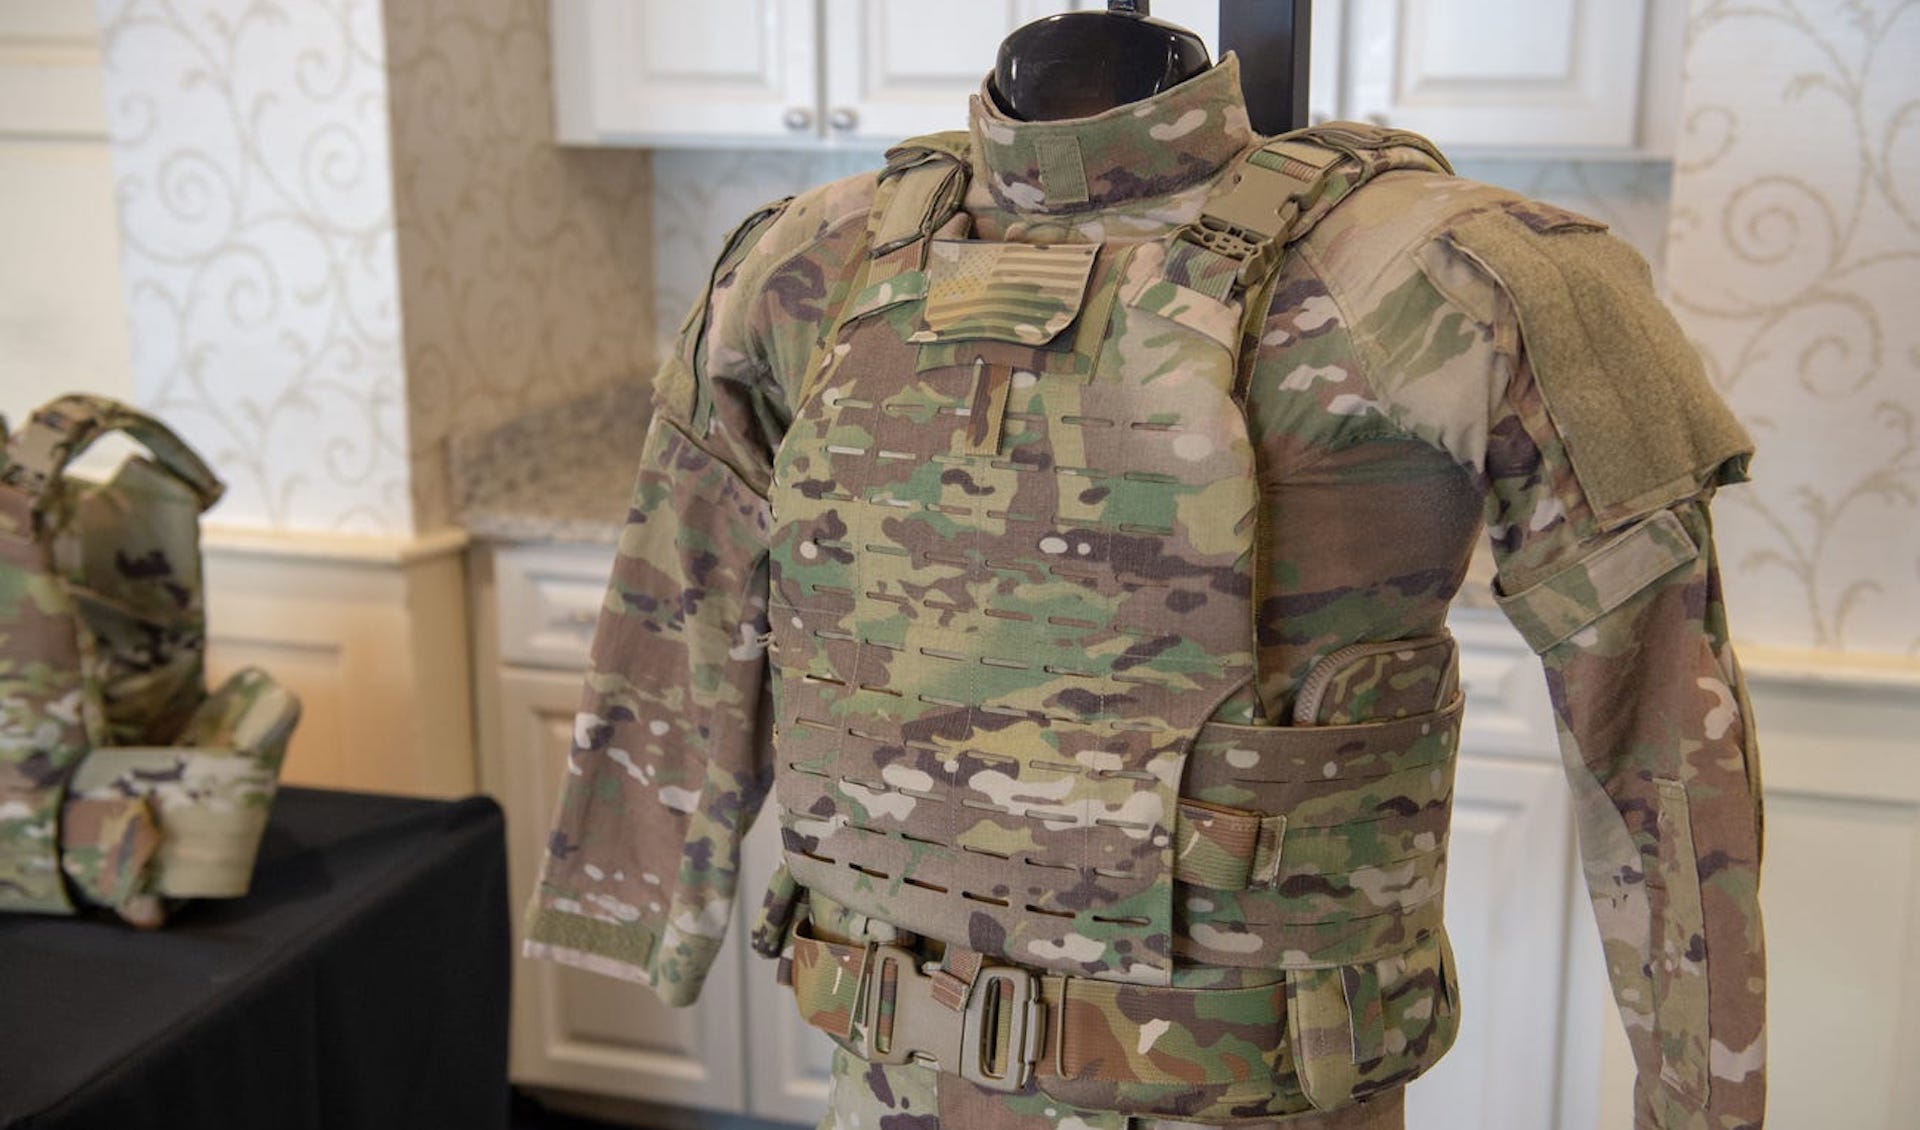 The Army S Next Generation Body Armor Plates Don T Get The Job Done